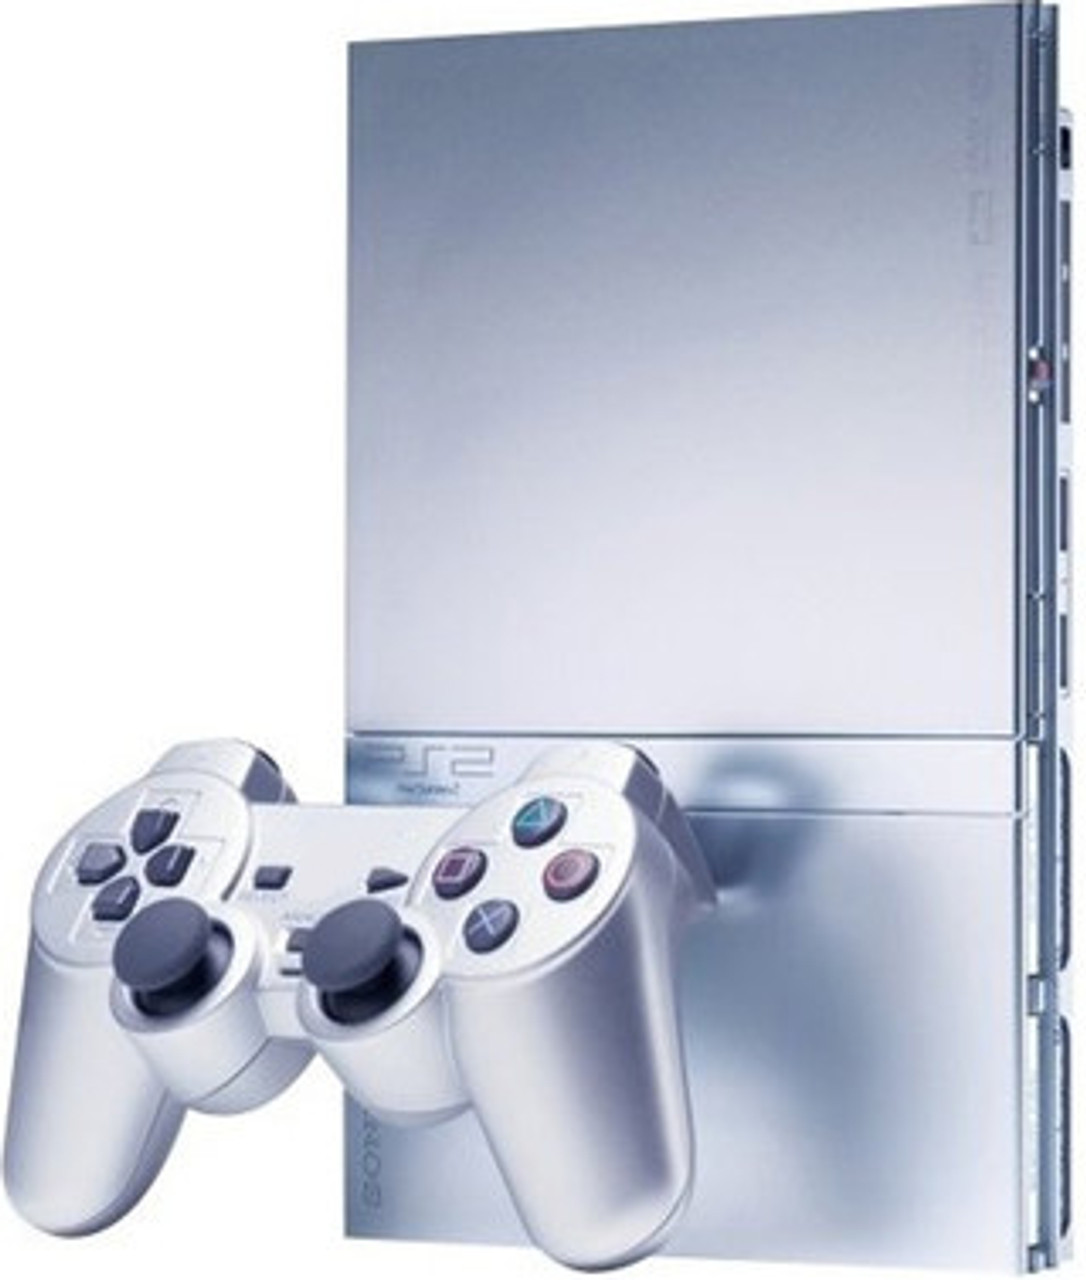 Sony PlayStation 2 Slim Launch Edition Charcoal Black Console  (SCPH-75001CB) for sale online